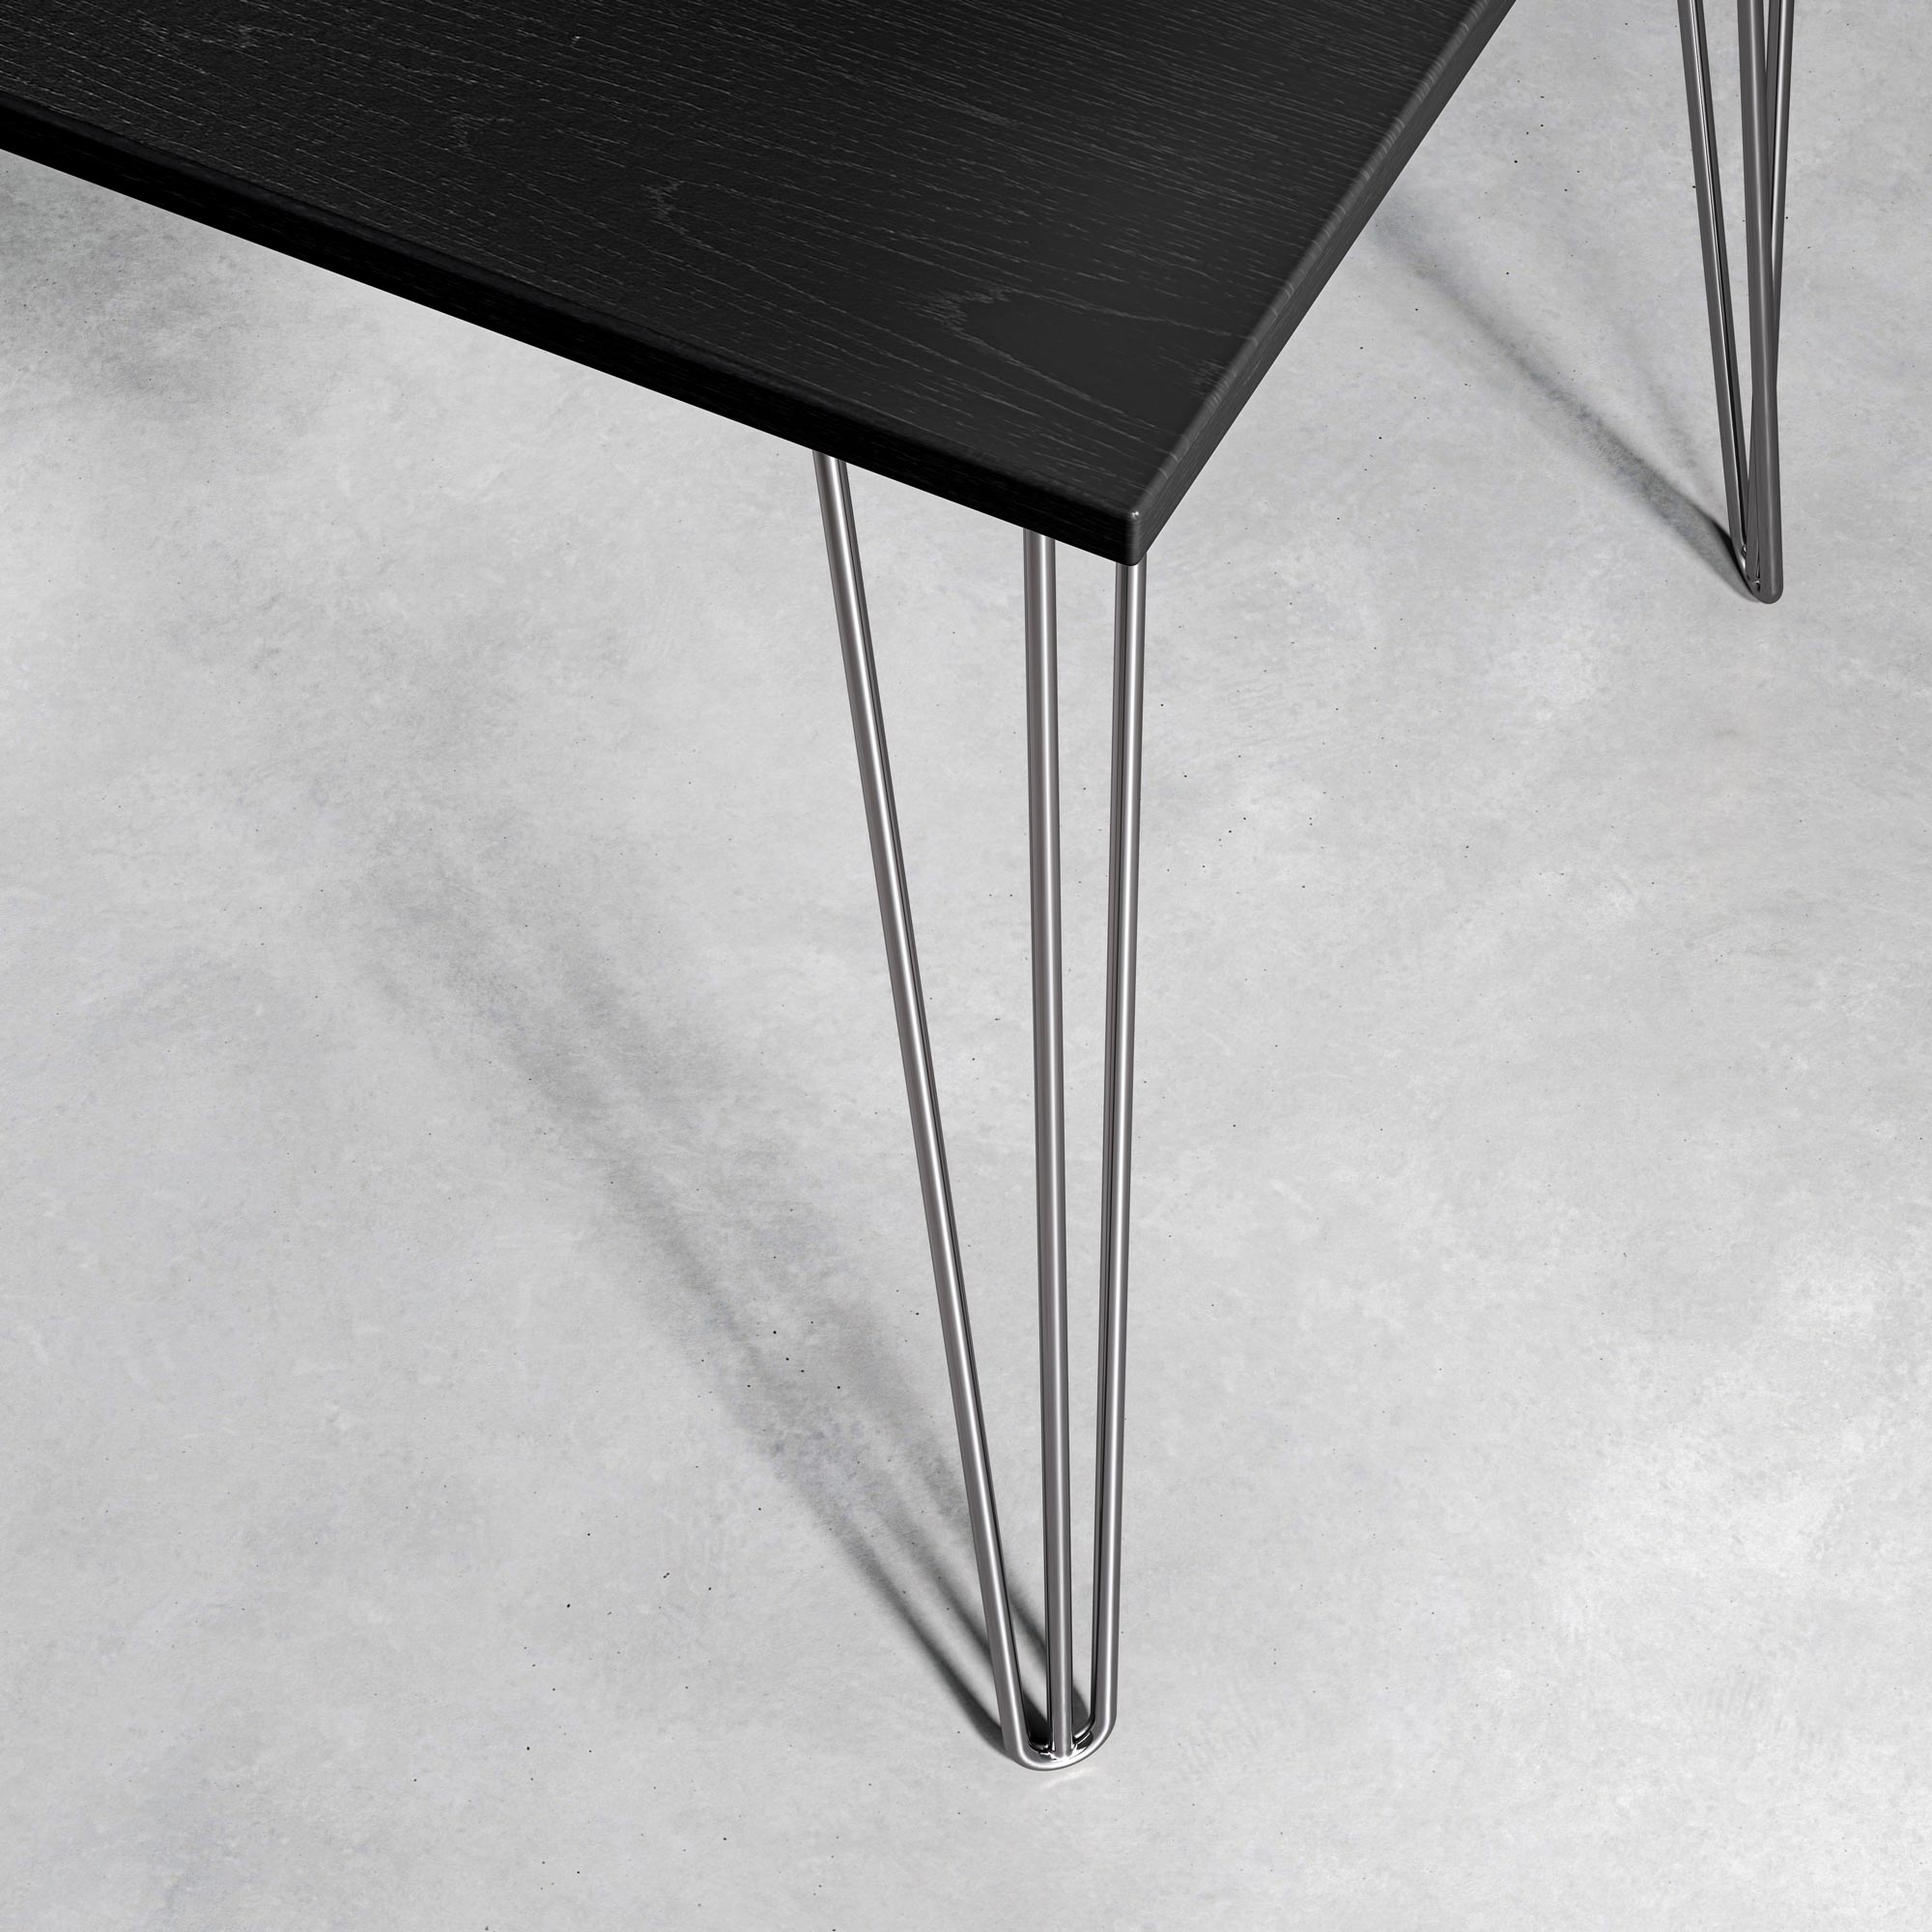 Black Ash Hairpin Table-Small (60cm x 120cm)-Clear Coat-The Hairpin Leg Co.